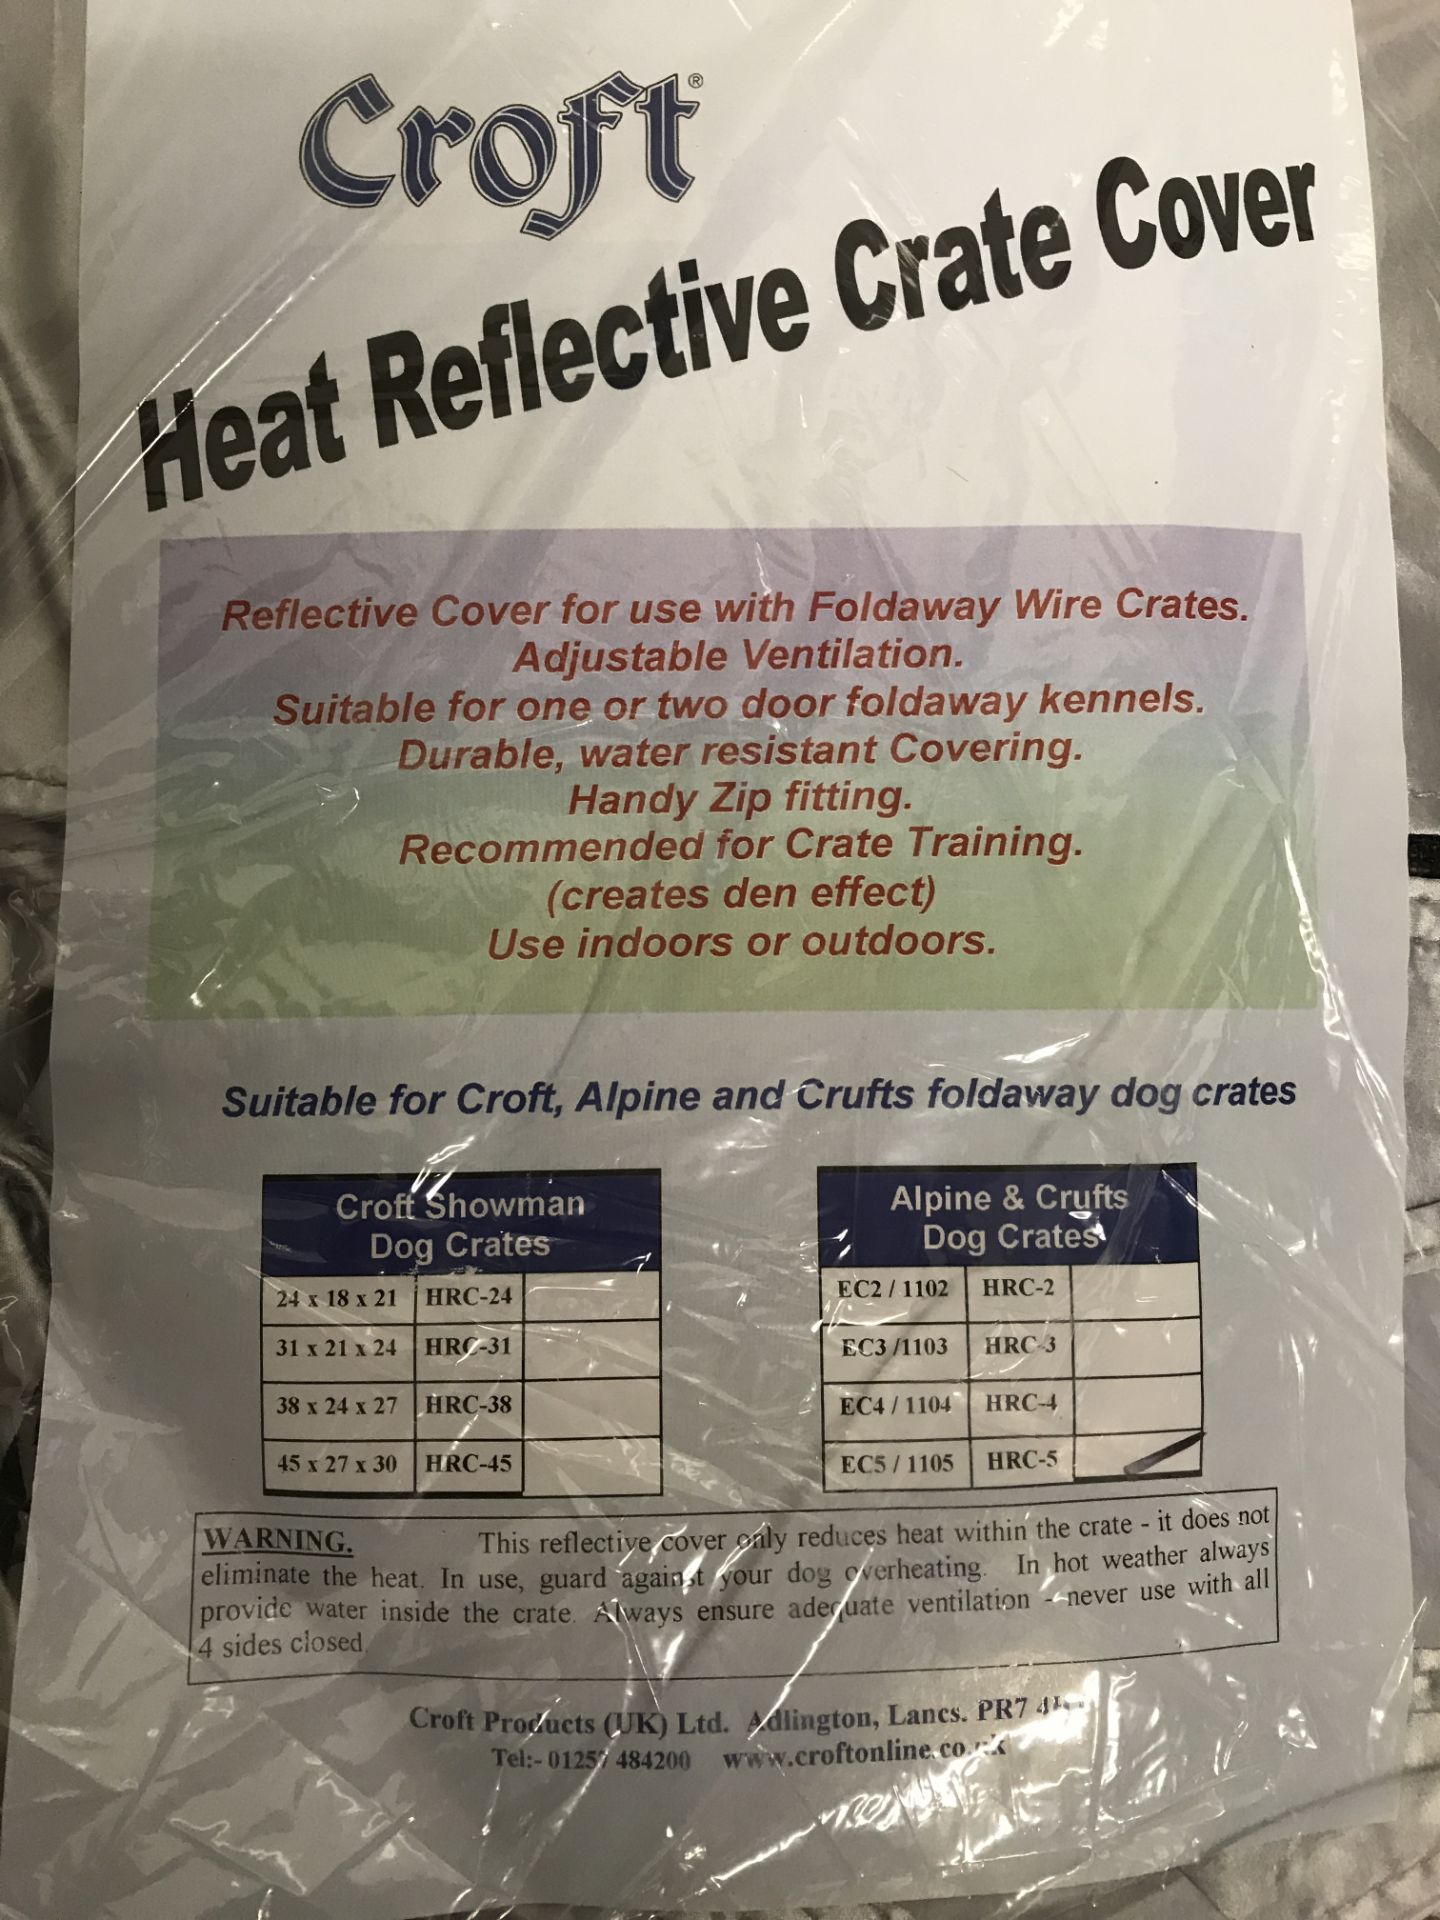 5 x Croft Heat Reflective Crate Covers - Image 2 of 2